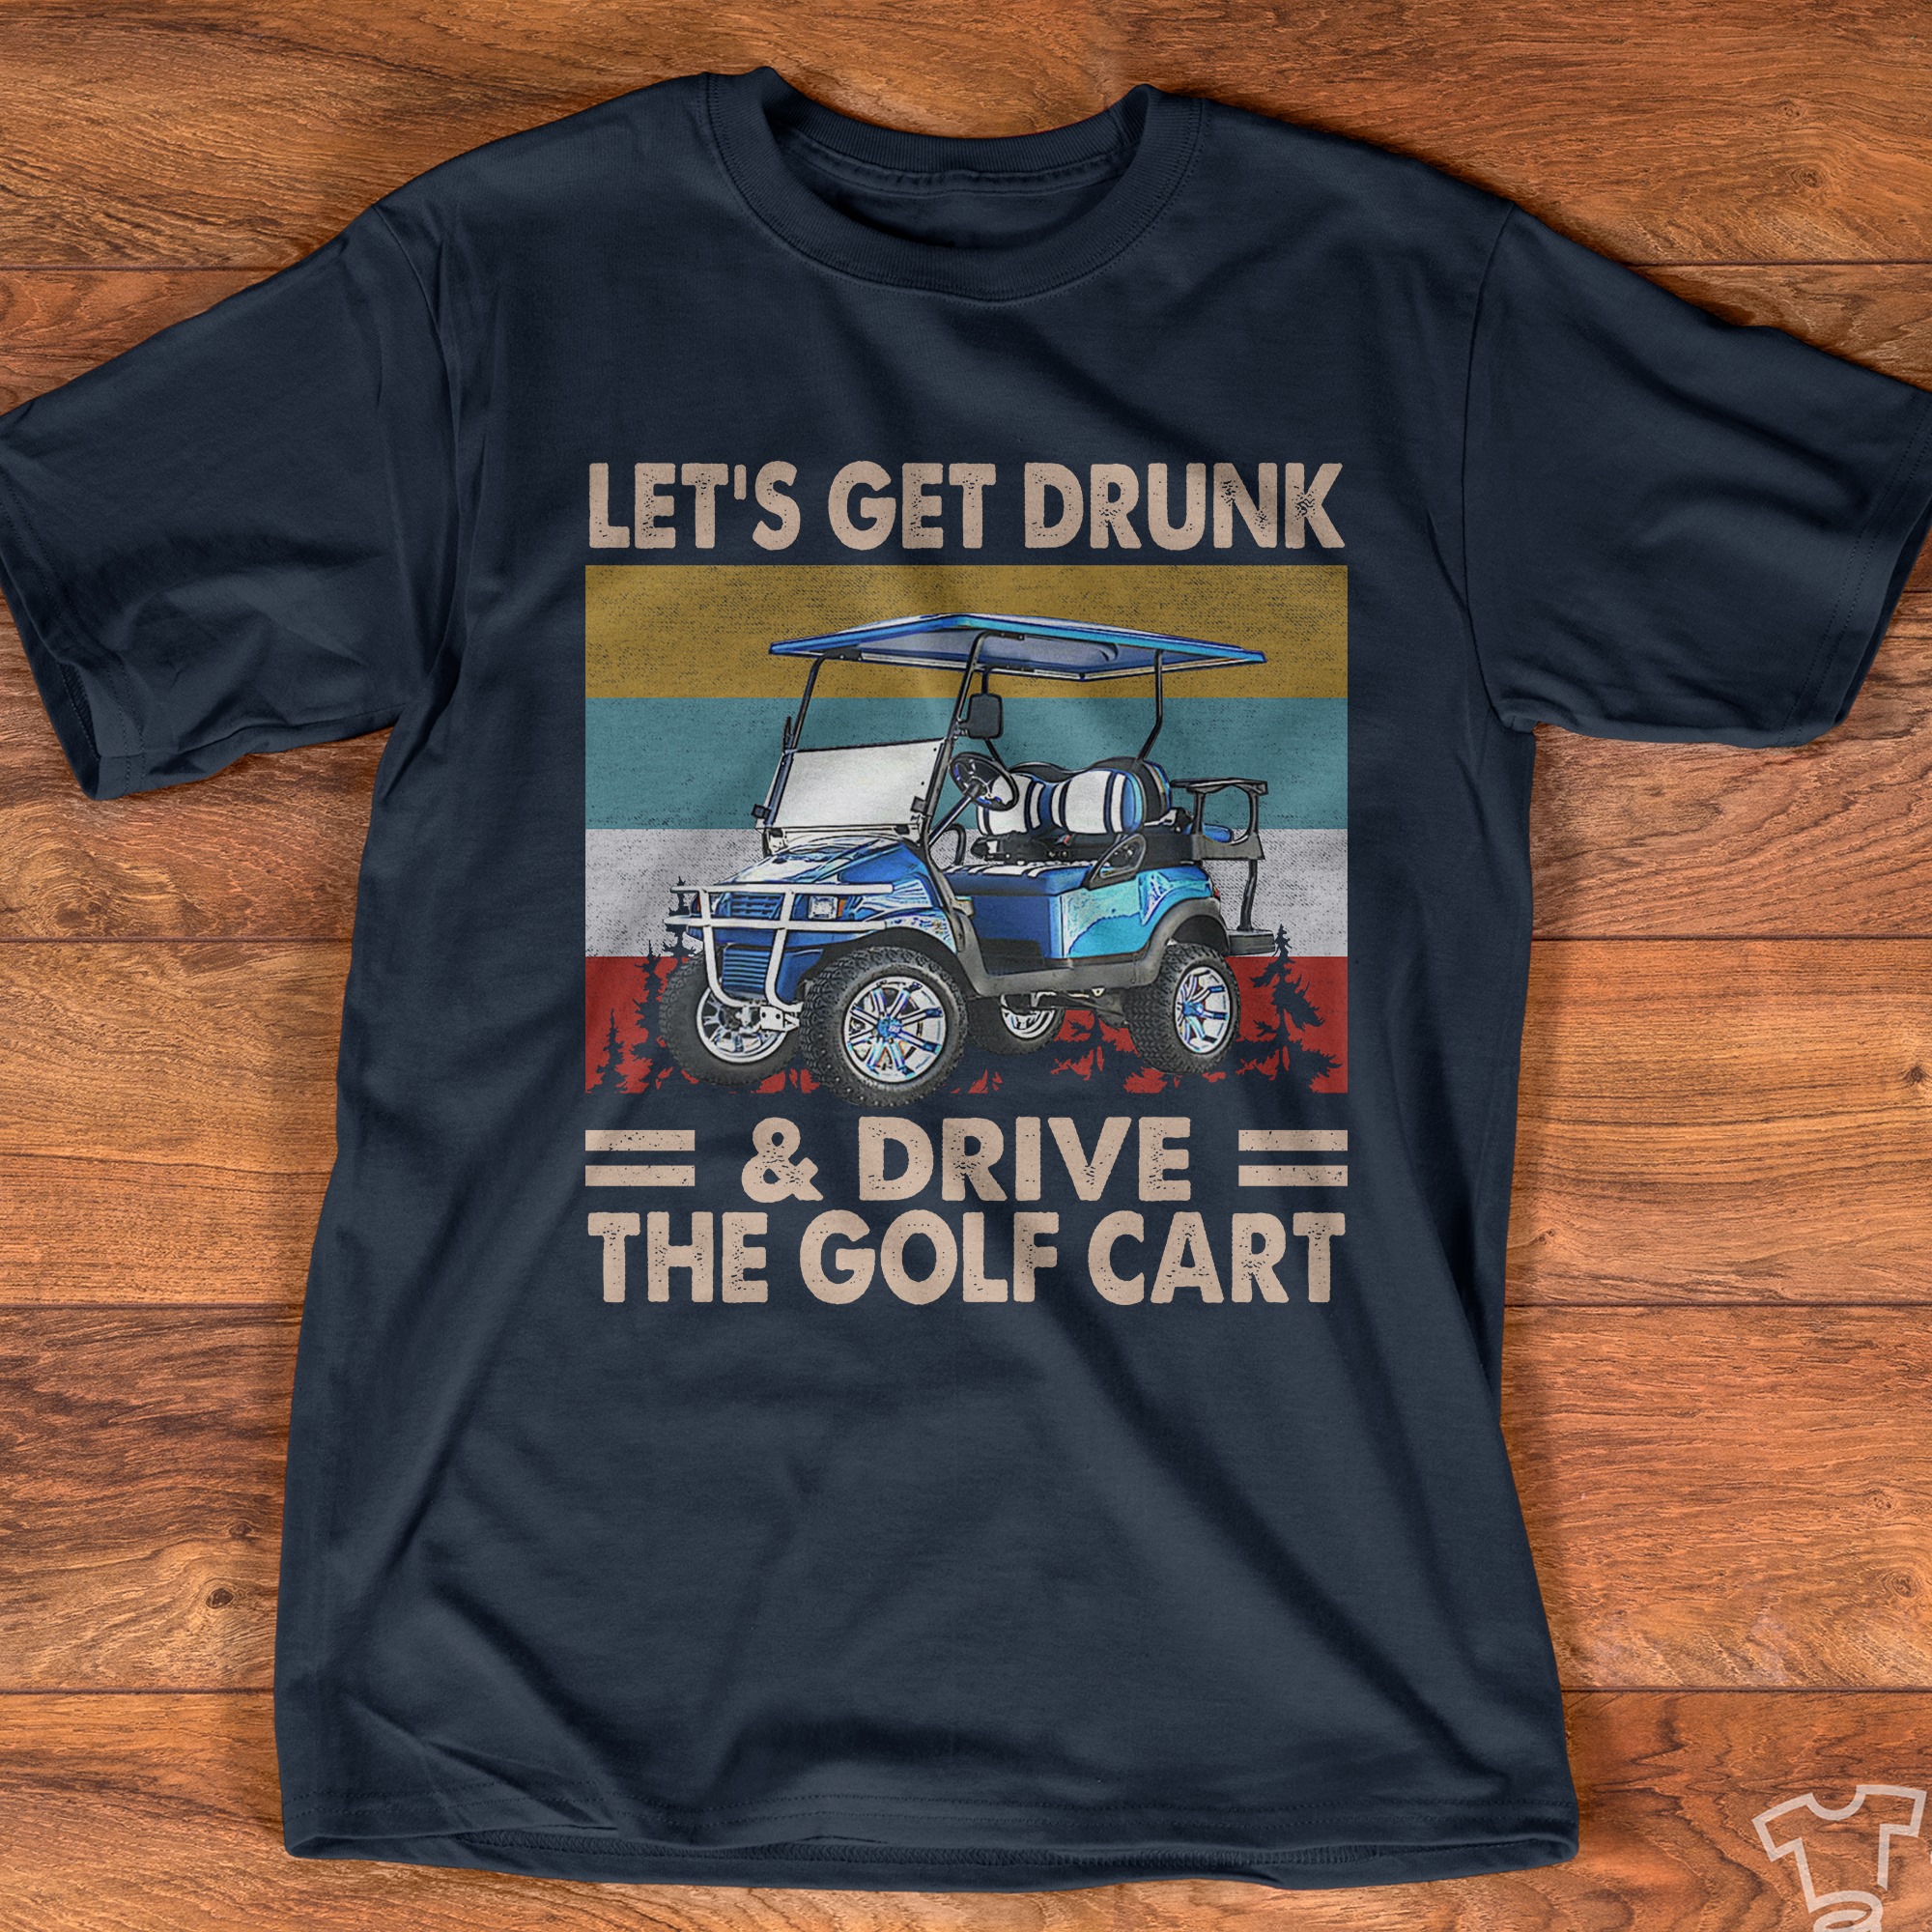 Let's get drunk and drive the golf cart